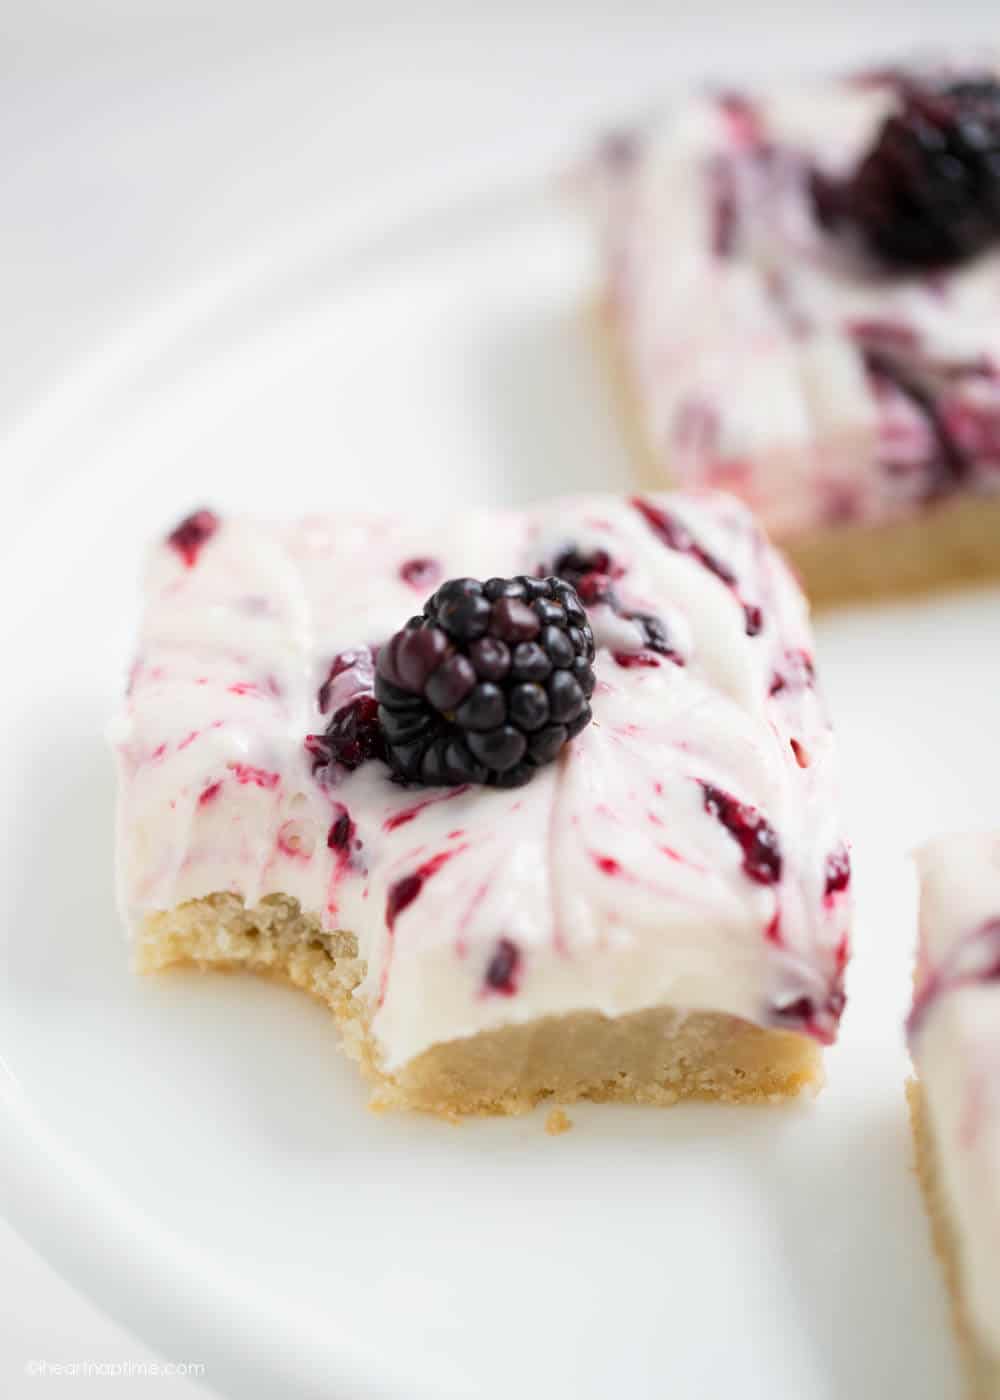 Blackberry cheesecake bar with a bite taken out.